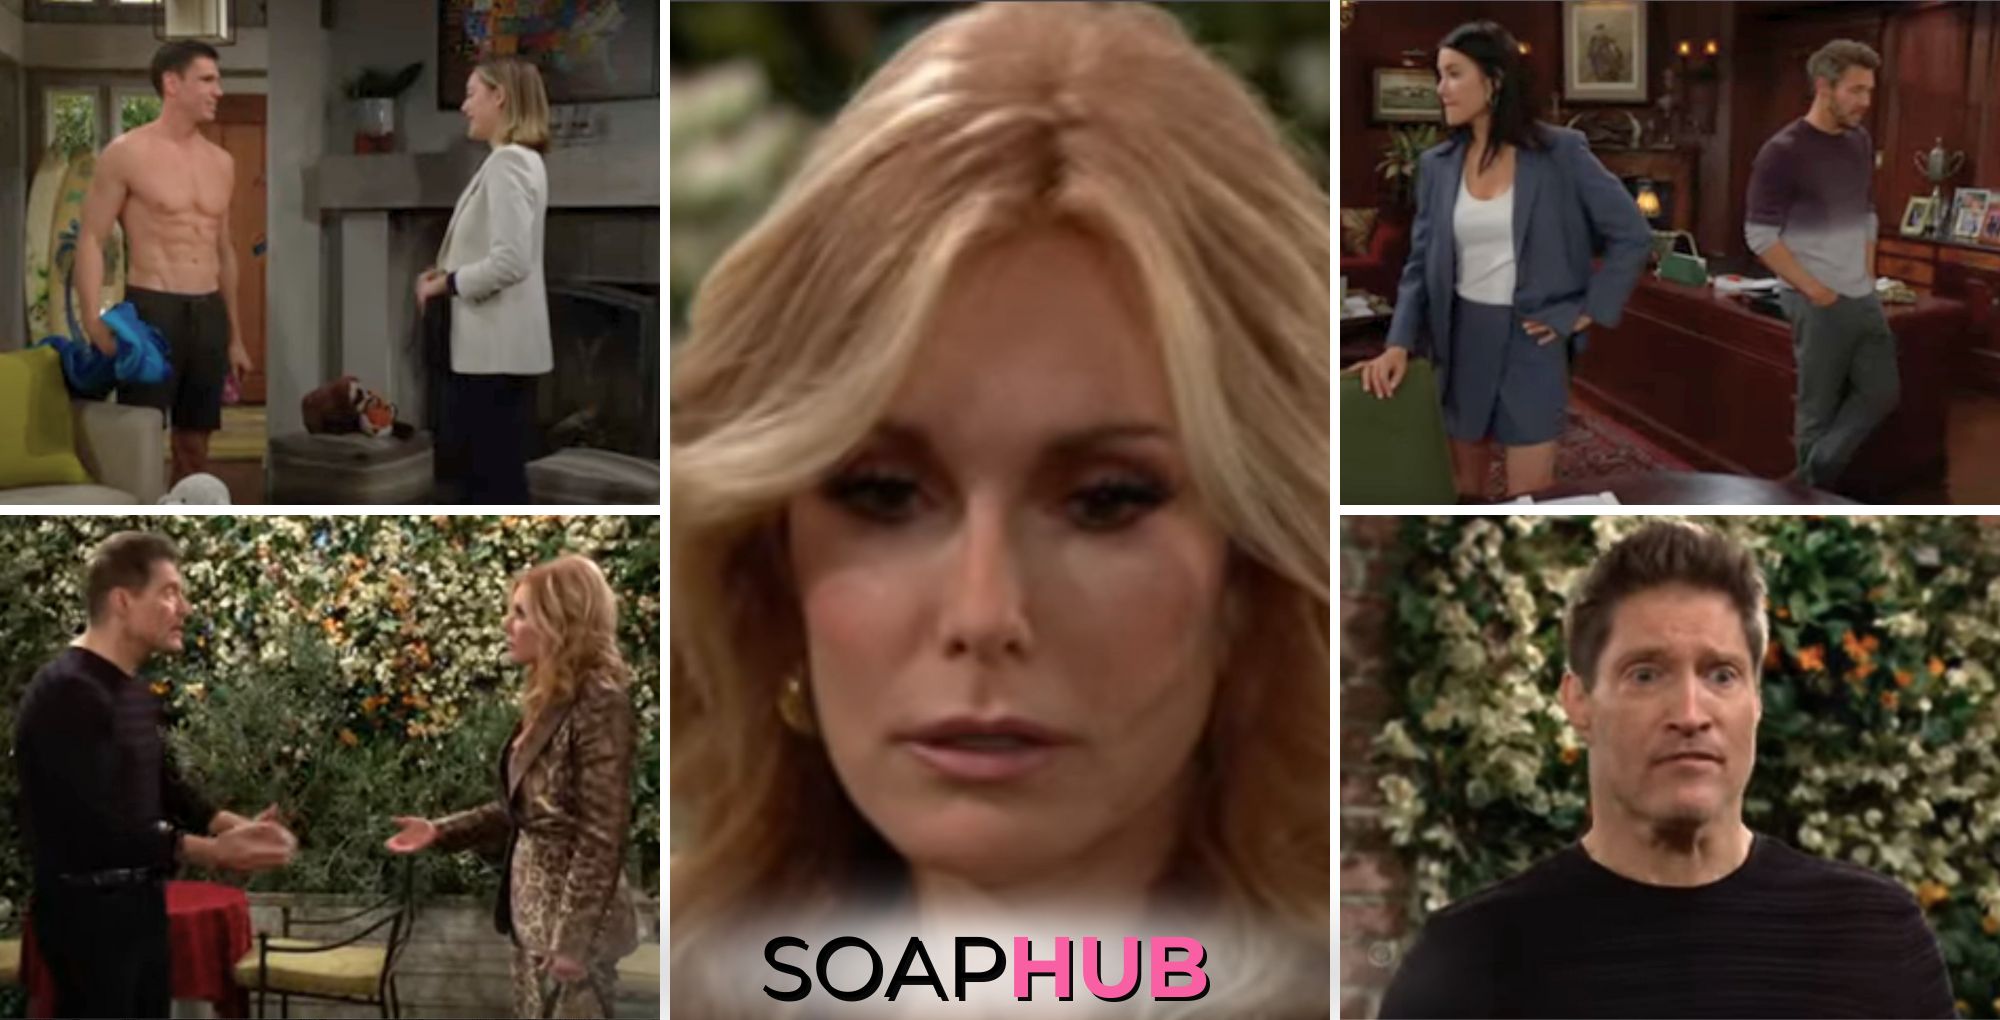 The Bold and the Beautiful recap for April 19 features Hope, Liam, Finn, Steffy, Deacon, and Lauren with the Soap Hub logo across the bottom.